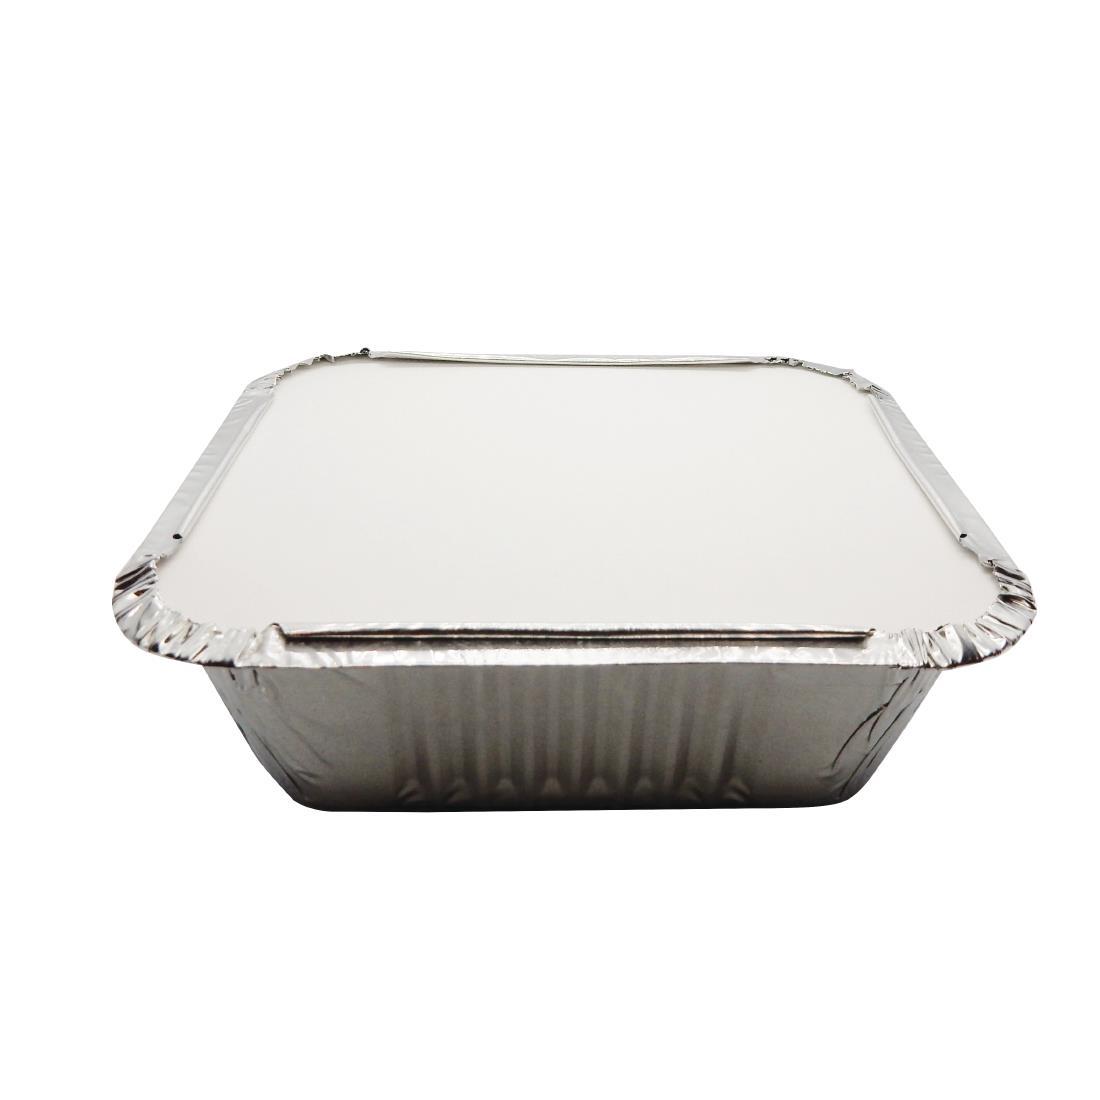 Rectangular Foil Containers 500ml / 16oz (Pack of 1000) - DY198  - 2